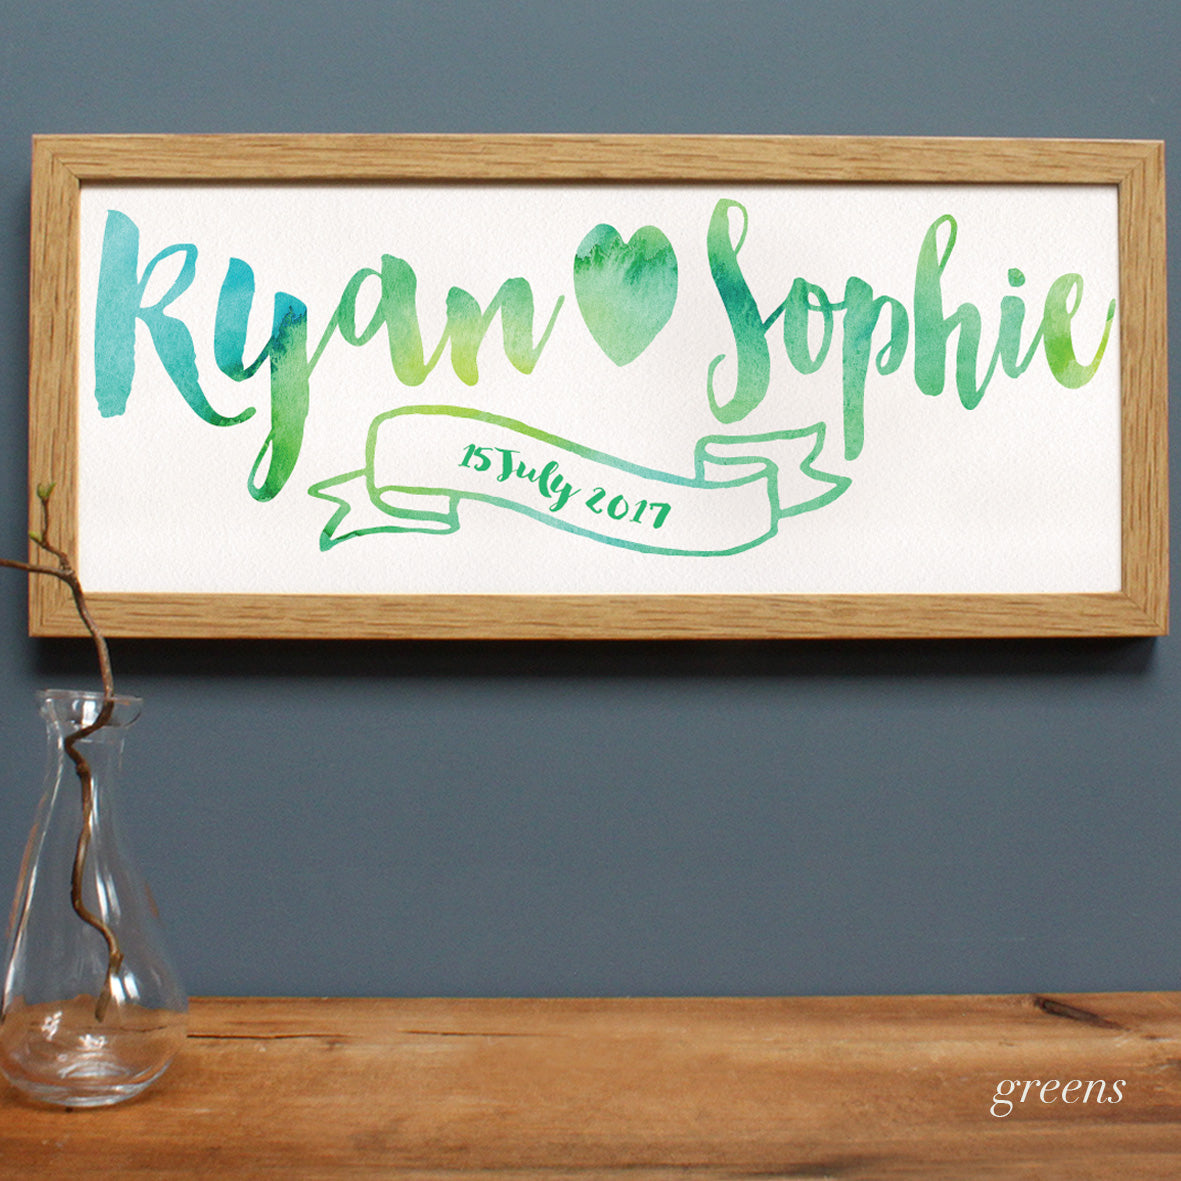 greens watercolour style lettering for a wedding gift in an oak frame